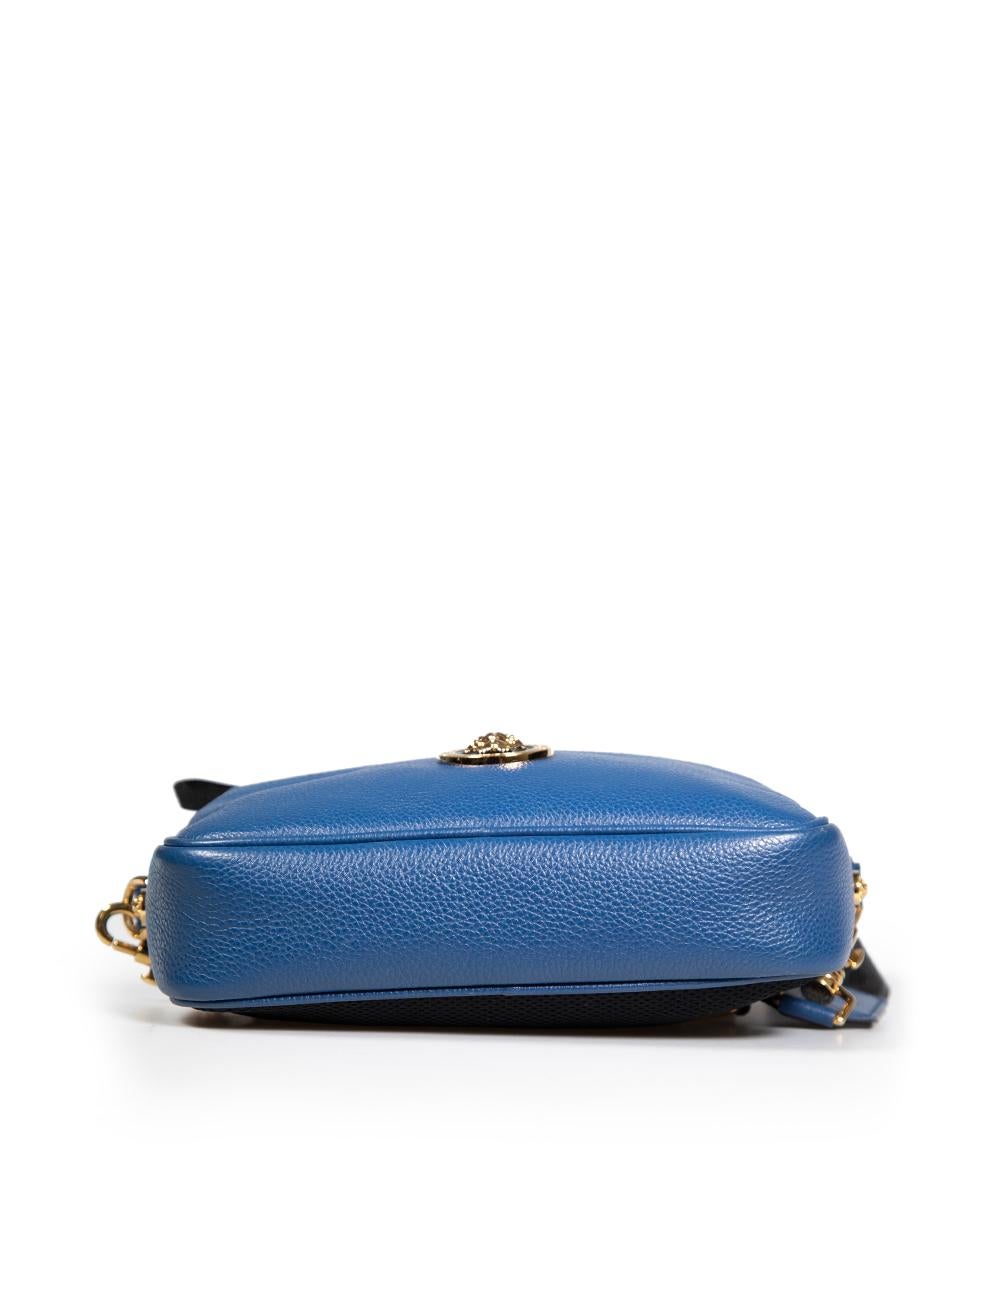 Women's Versace Blue Leather Grained Crossbody Bag For Sale